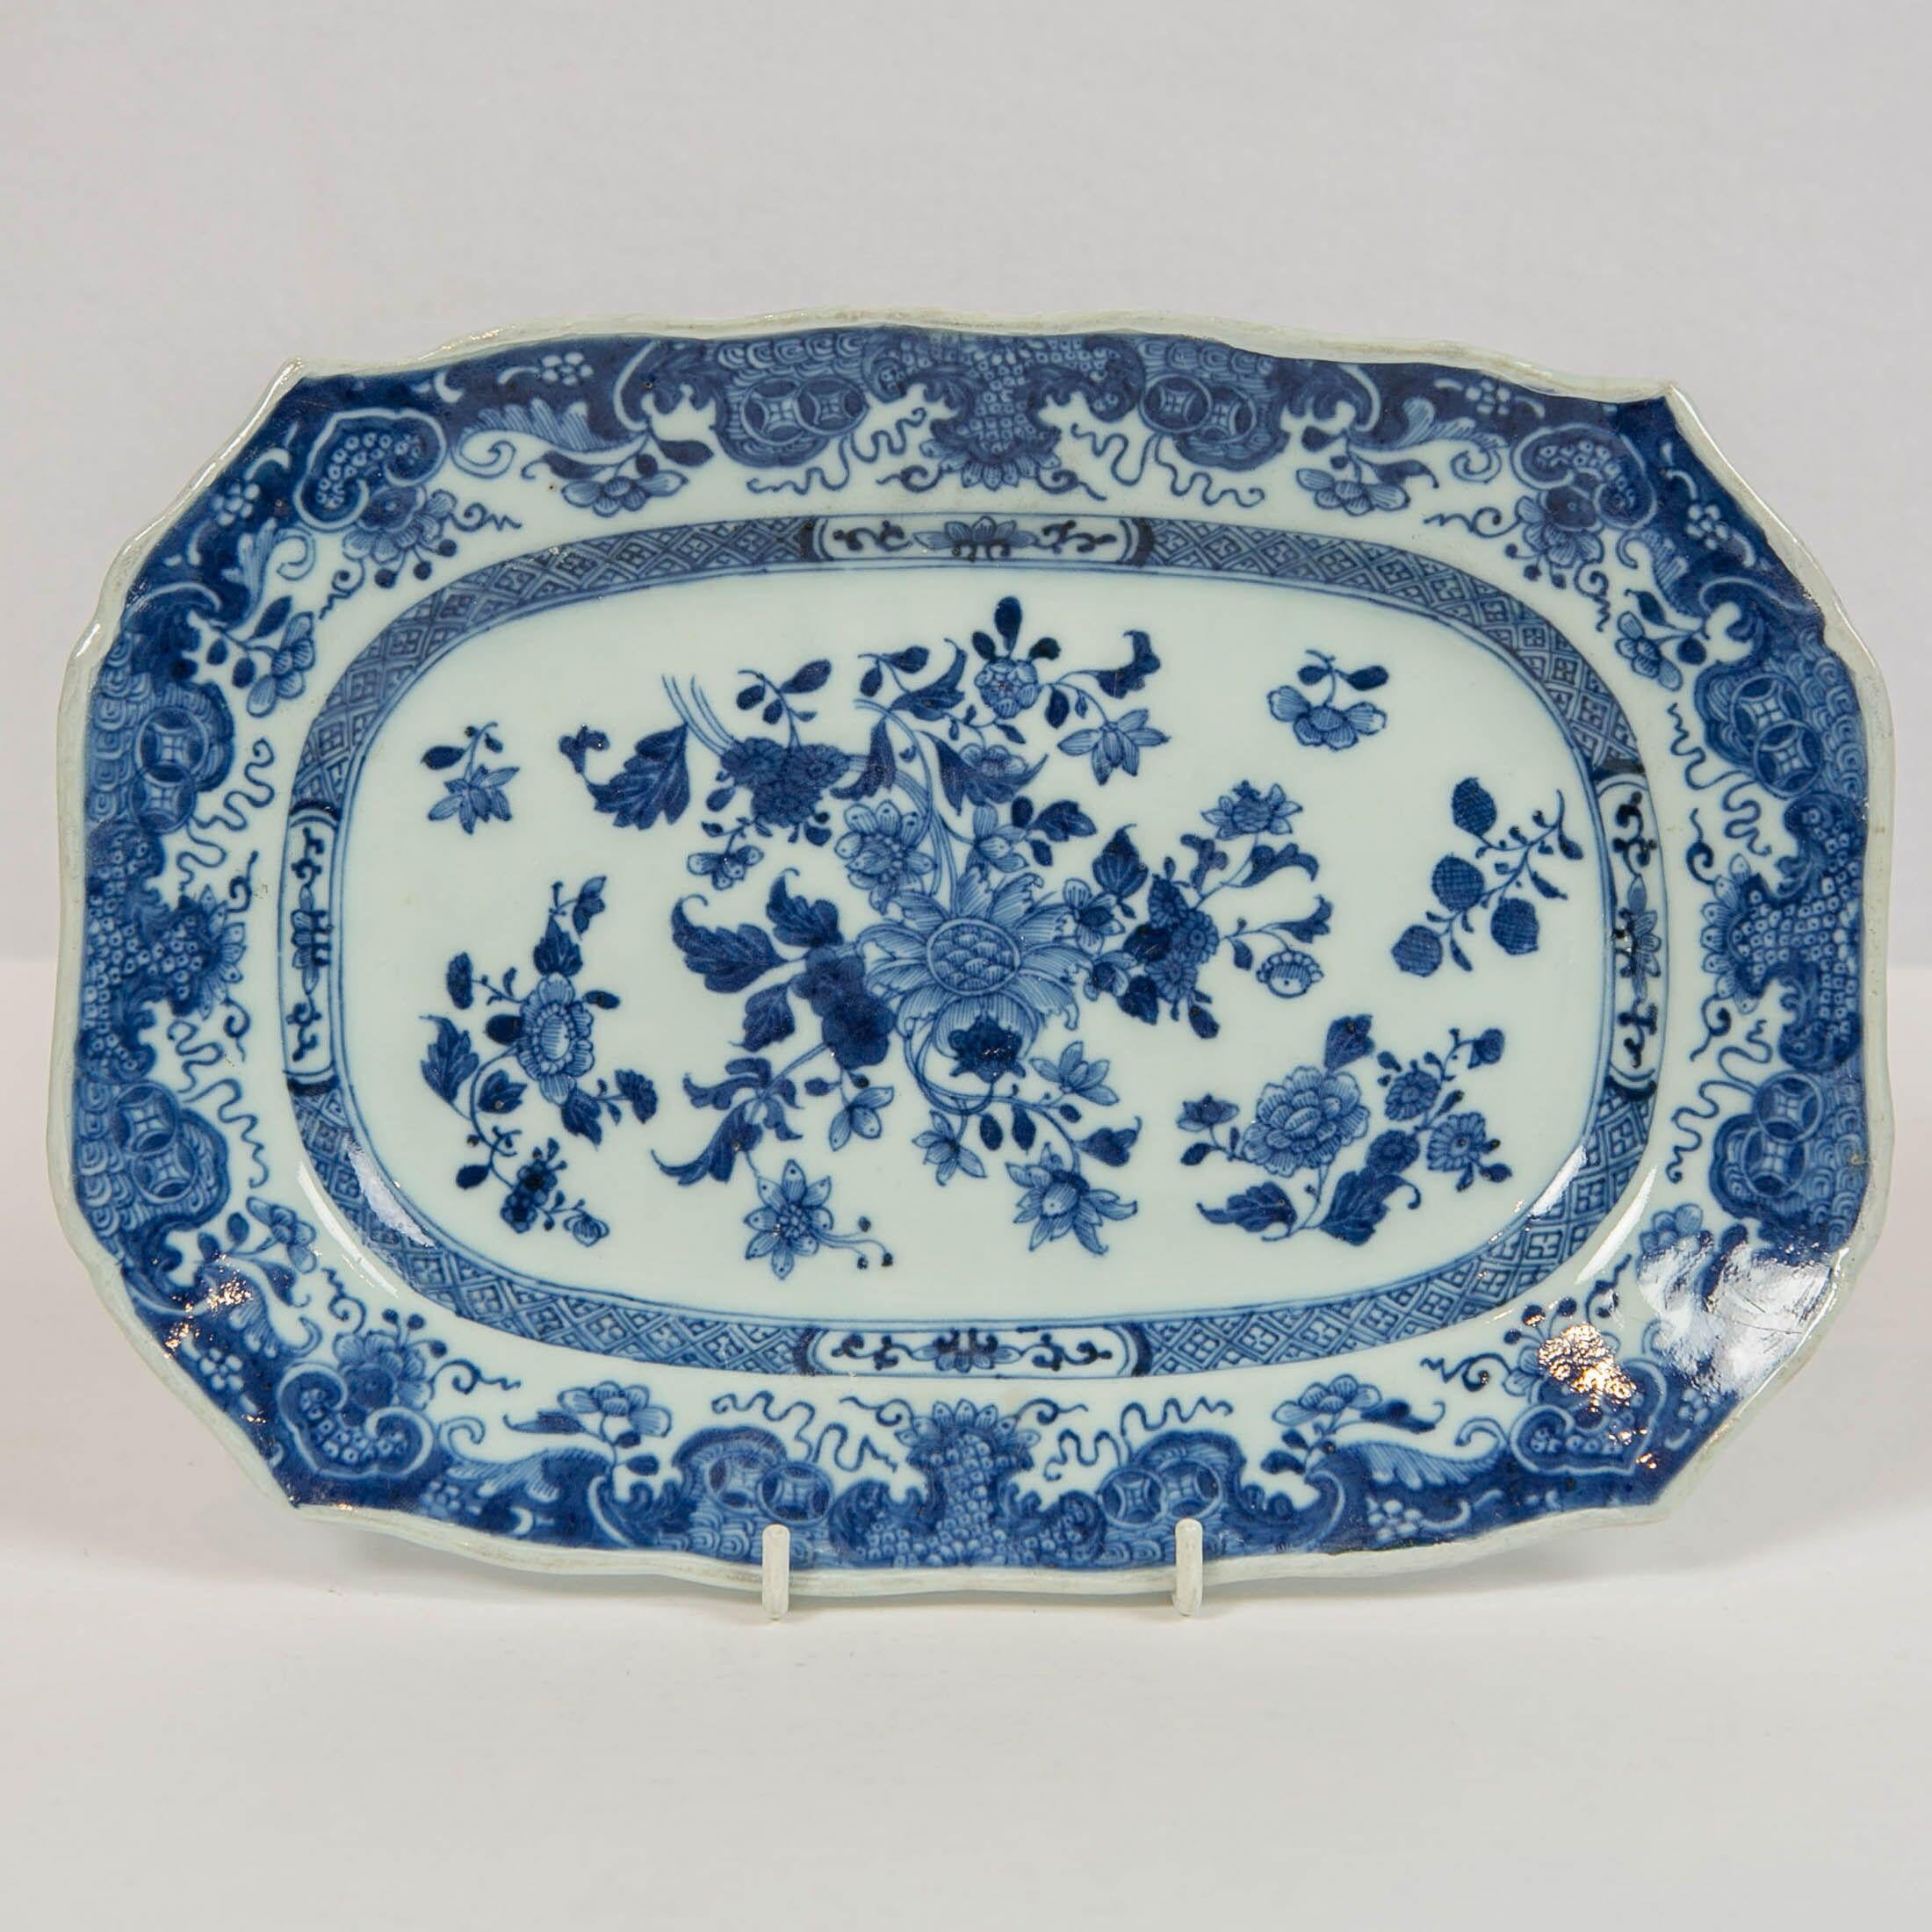 Qing Chinese Blue and White Small Platter Made circa 1770 during the Qianlong Period